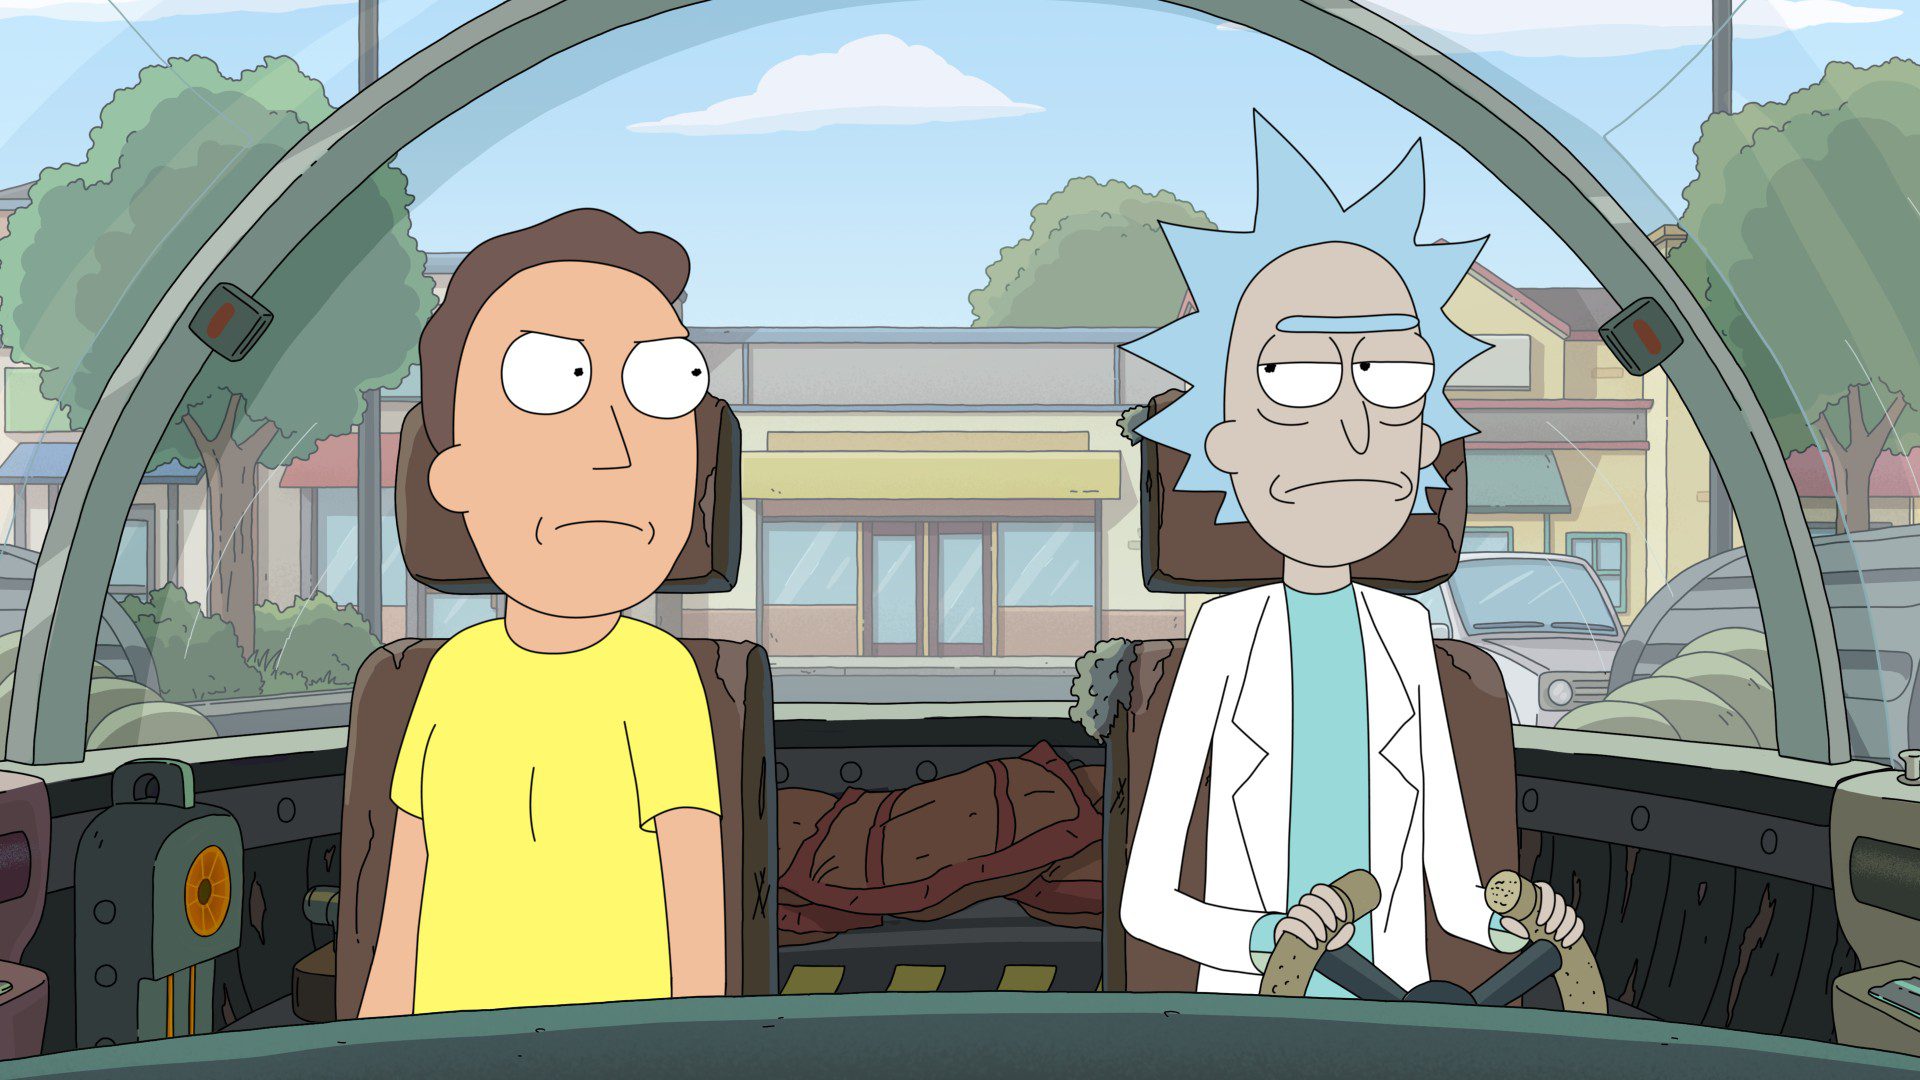 Rick and Morty Season 6 Episode 2 Release Date